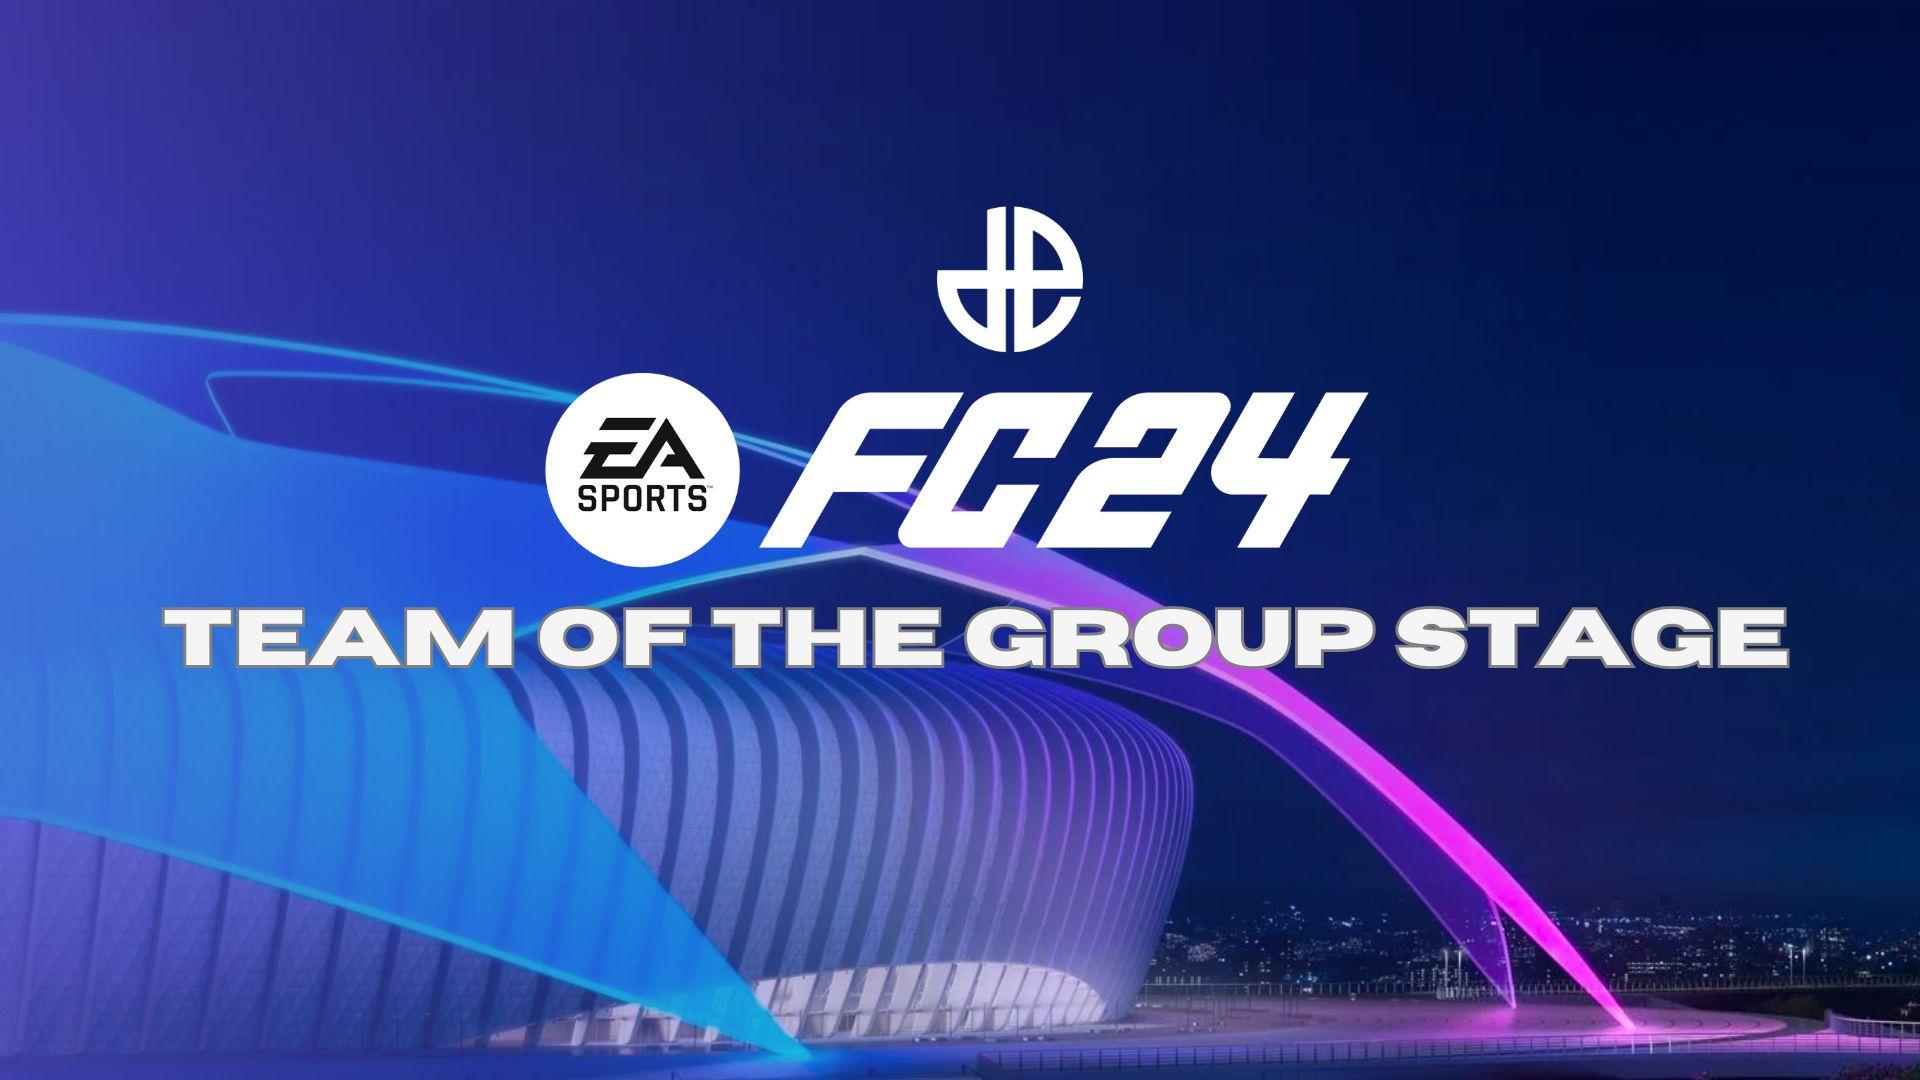 Will EA SPORTS FC 24 be free to play? - Dexerto